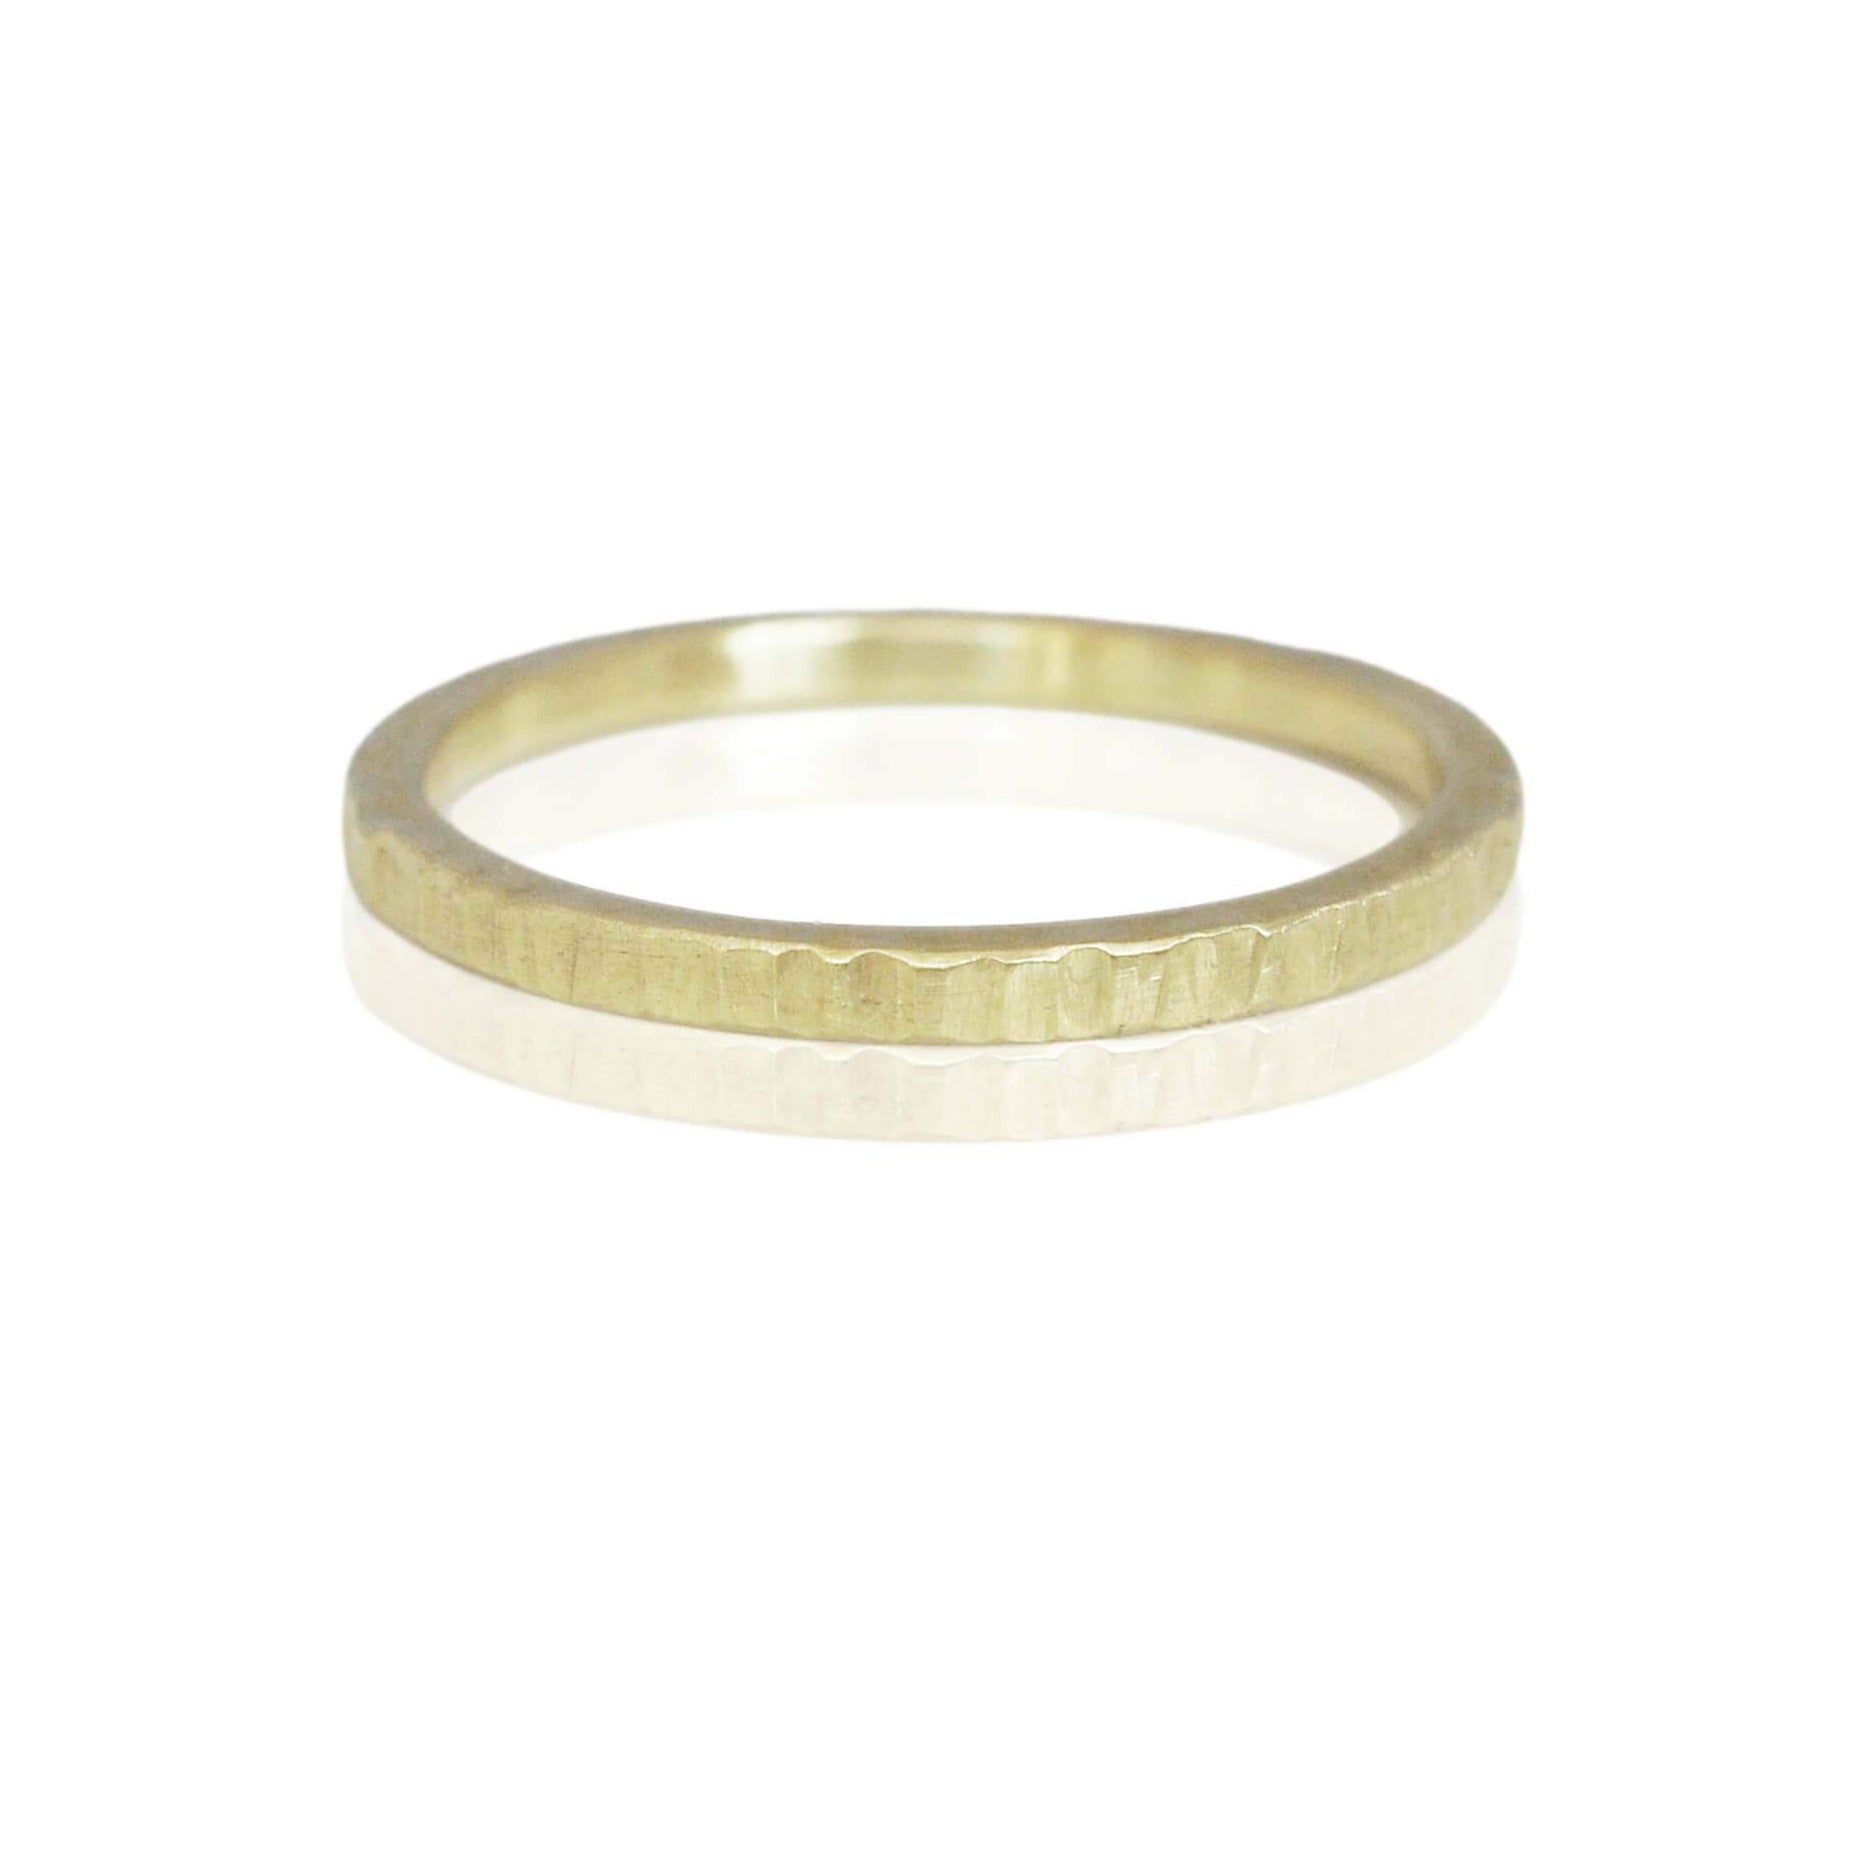 Linear hammered green gold wedding band. Handmade by EC Design Jewelry in Minneapolis, MN using recycled metal.